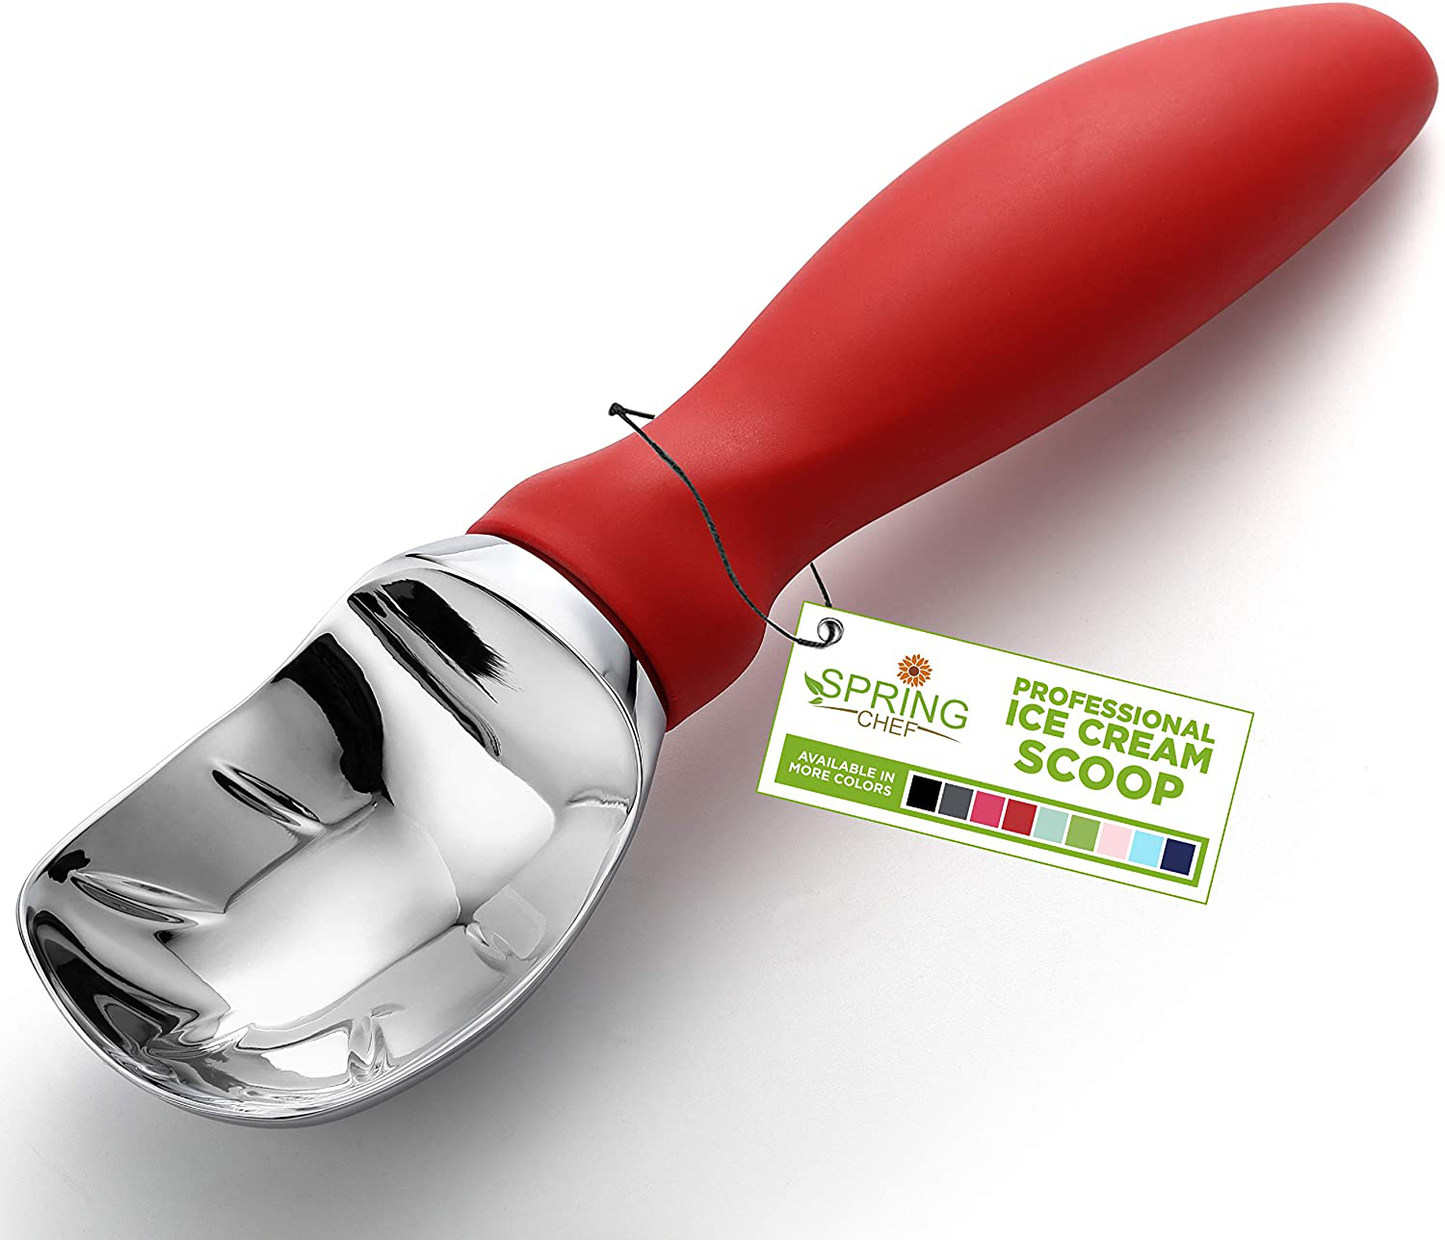 Spring Chef Ice Cream Scoop with Comfortable Handle